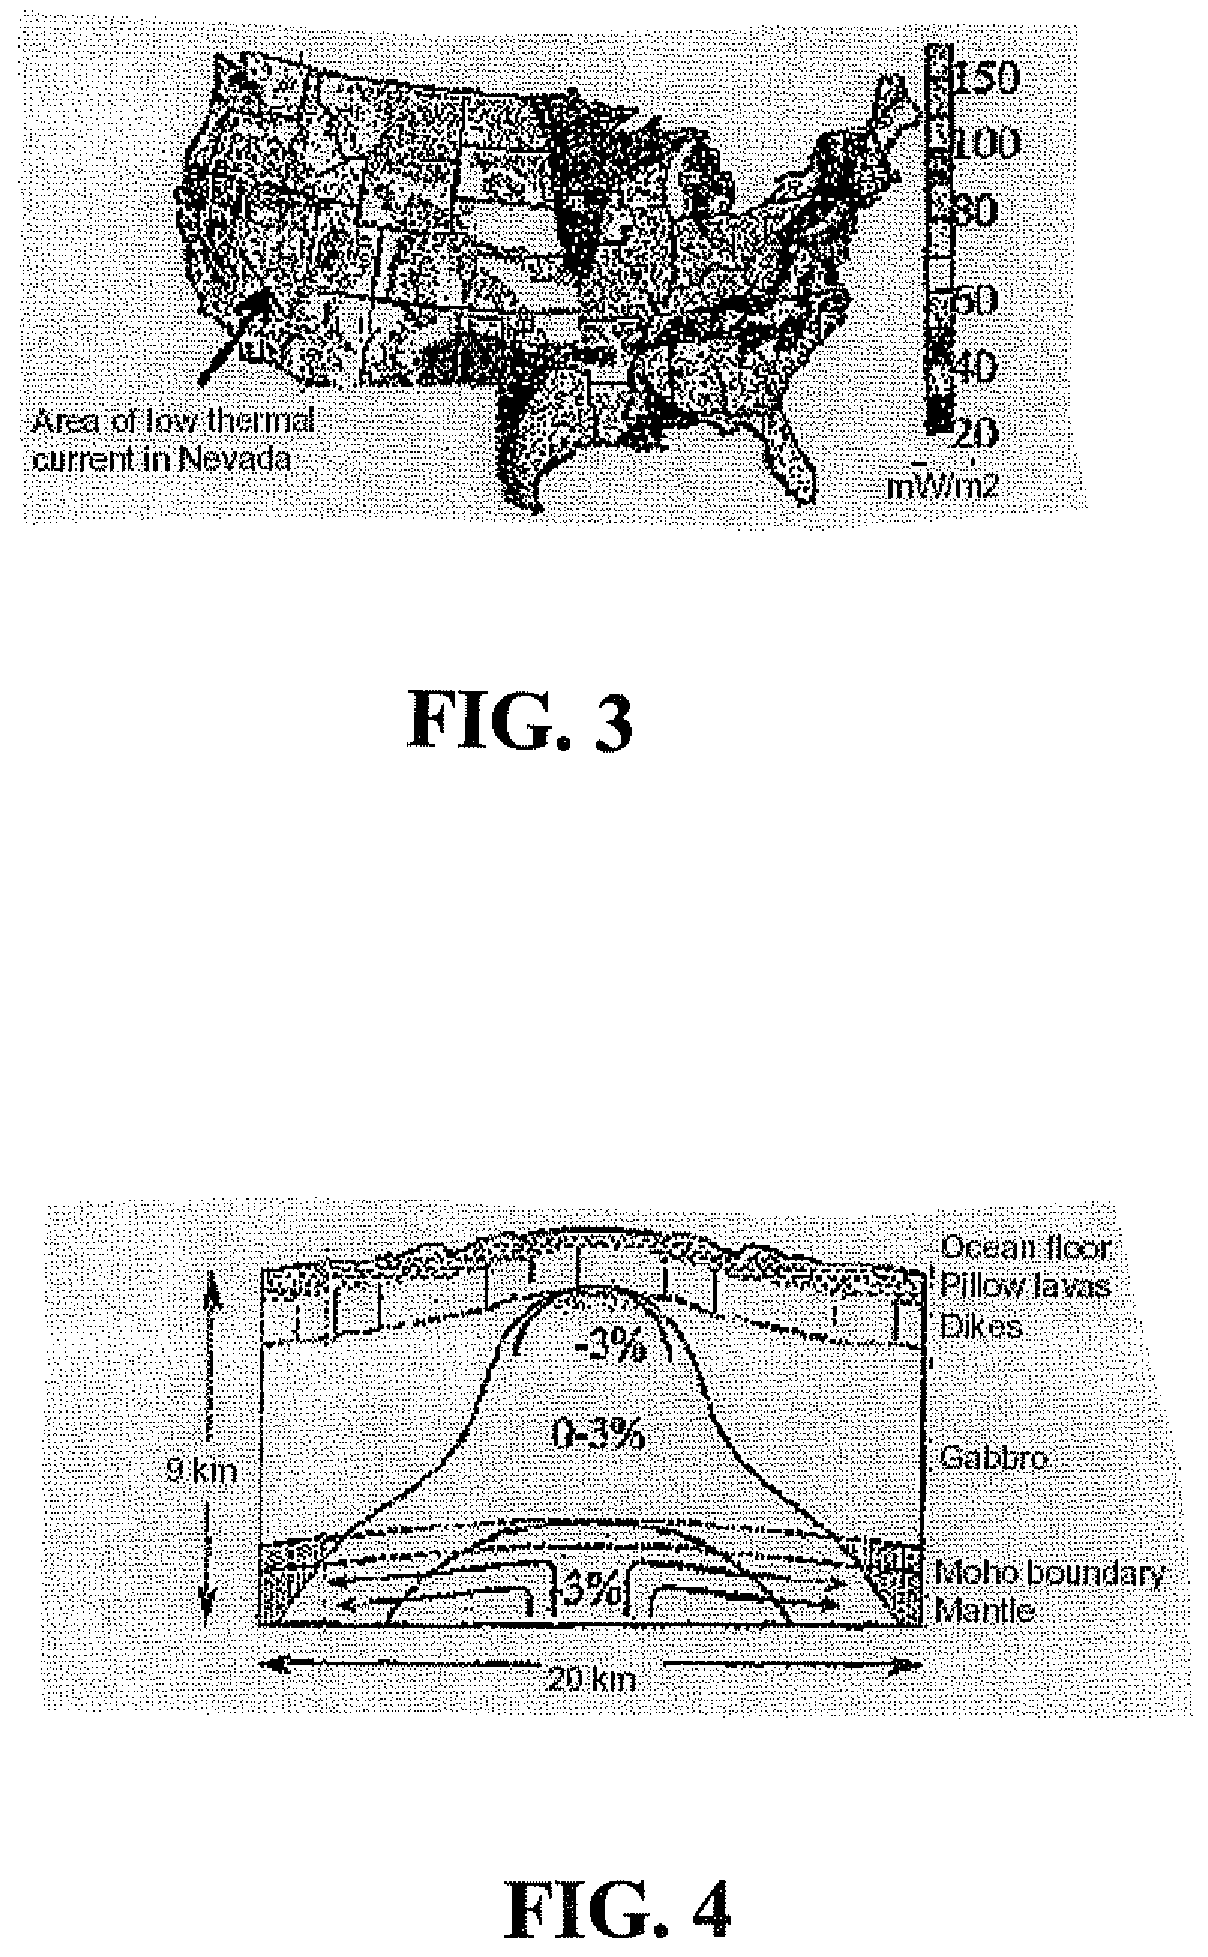 Method for detecting an occurrence zone of a mantle diapir finger location